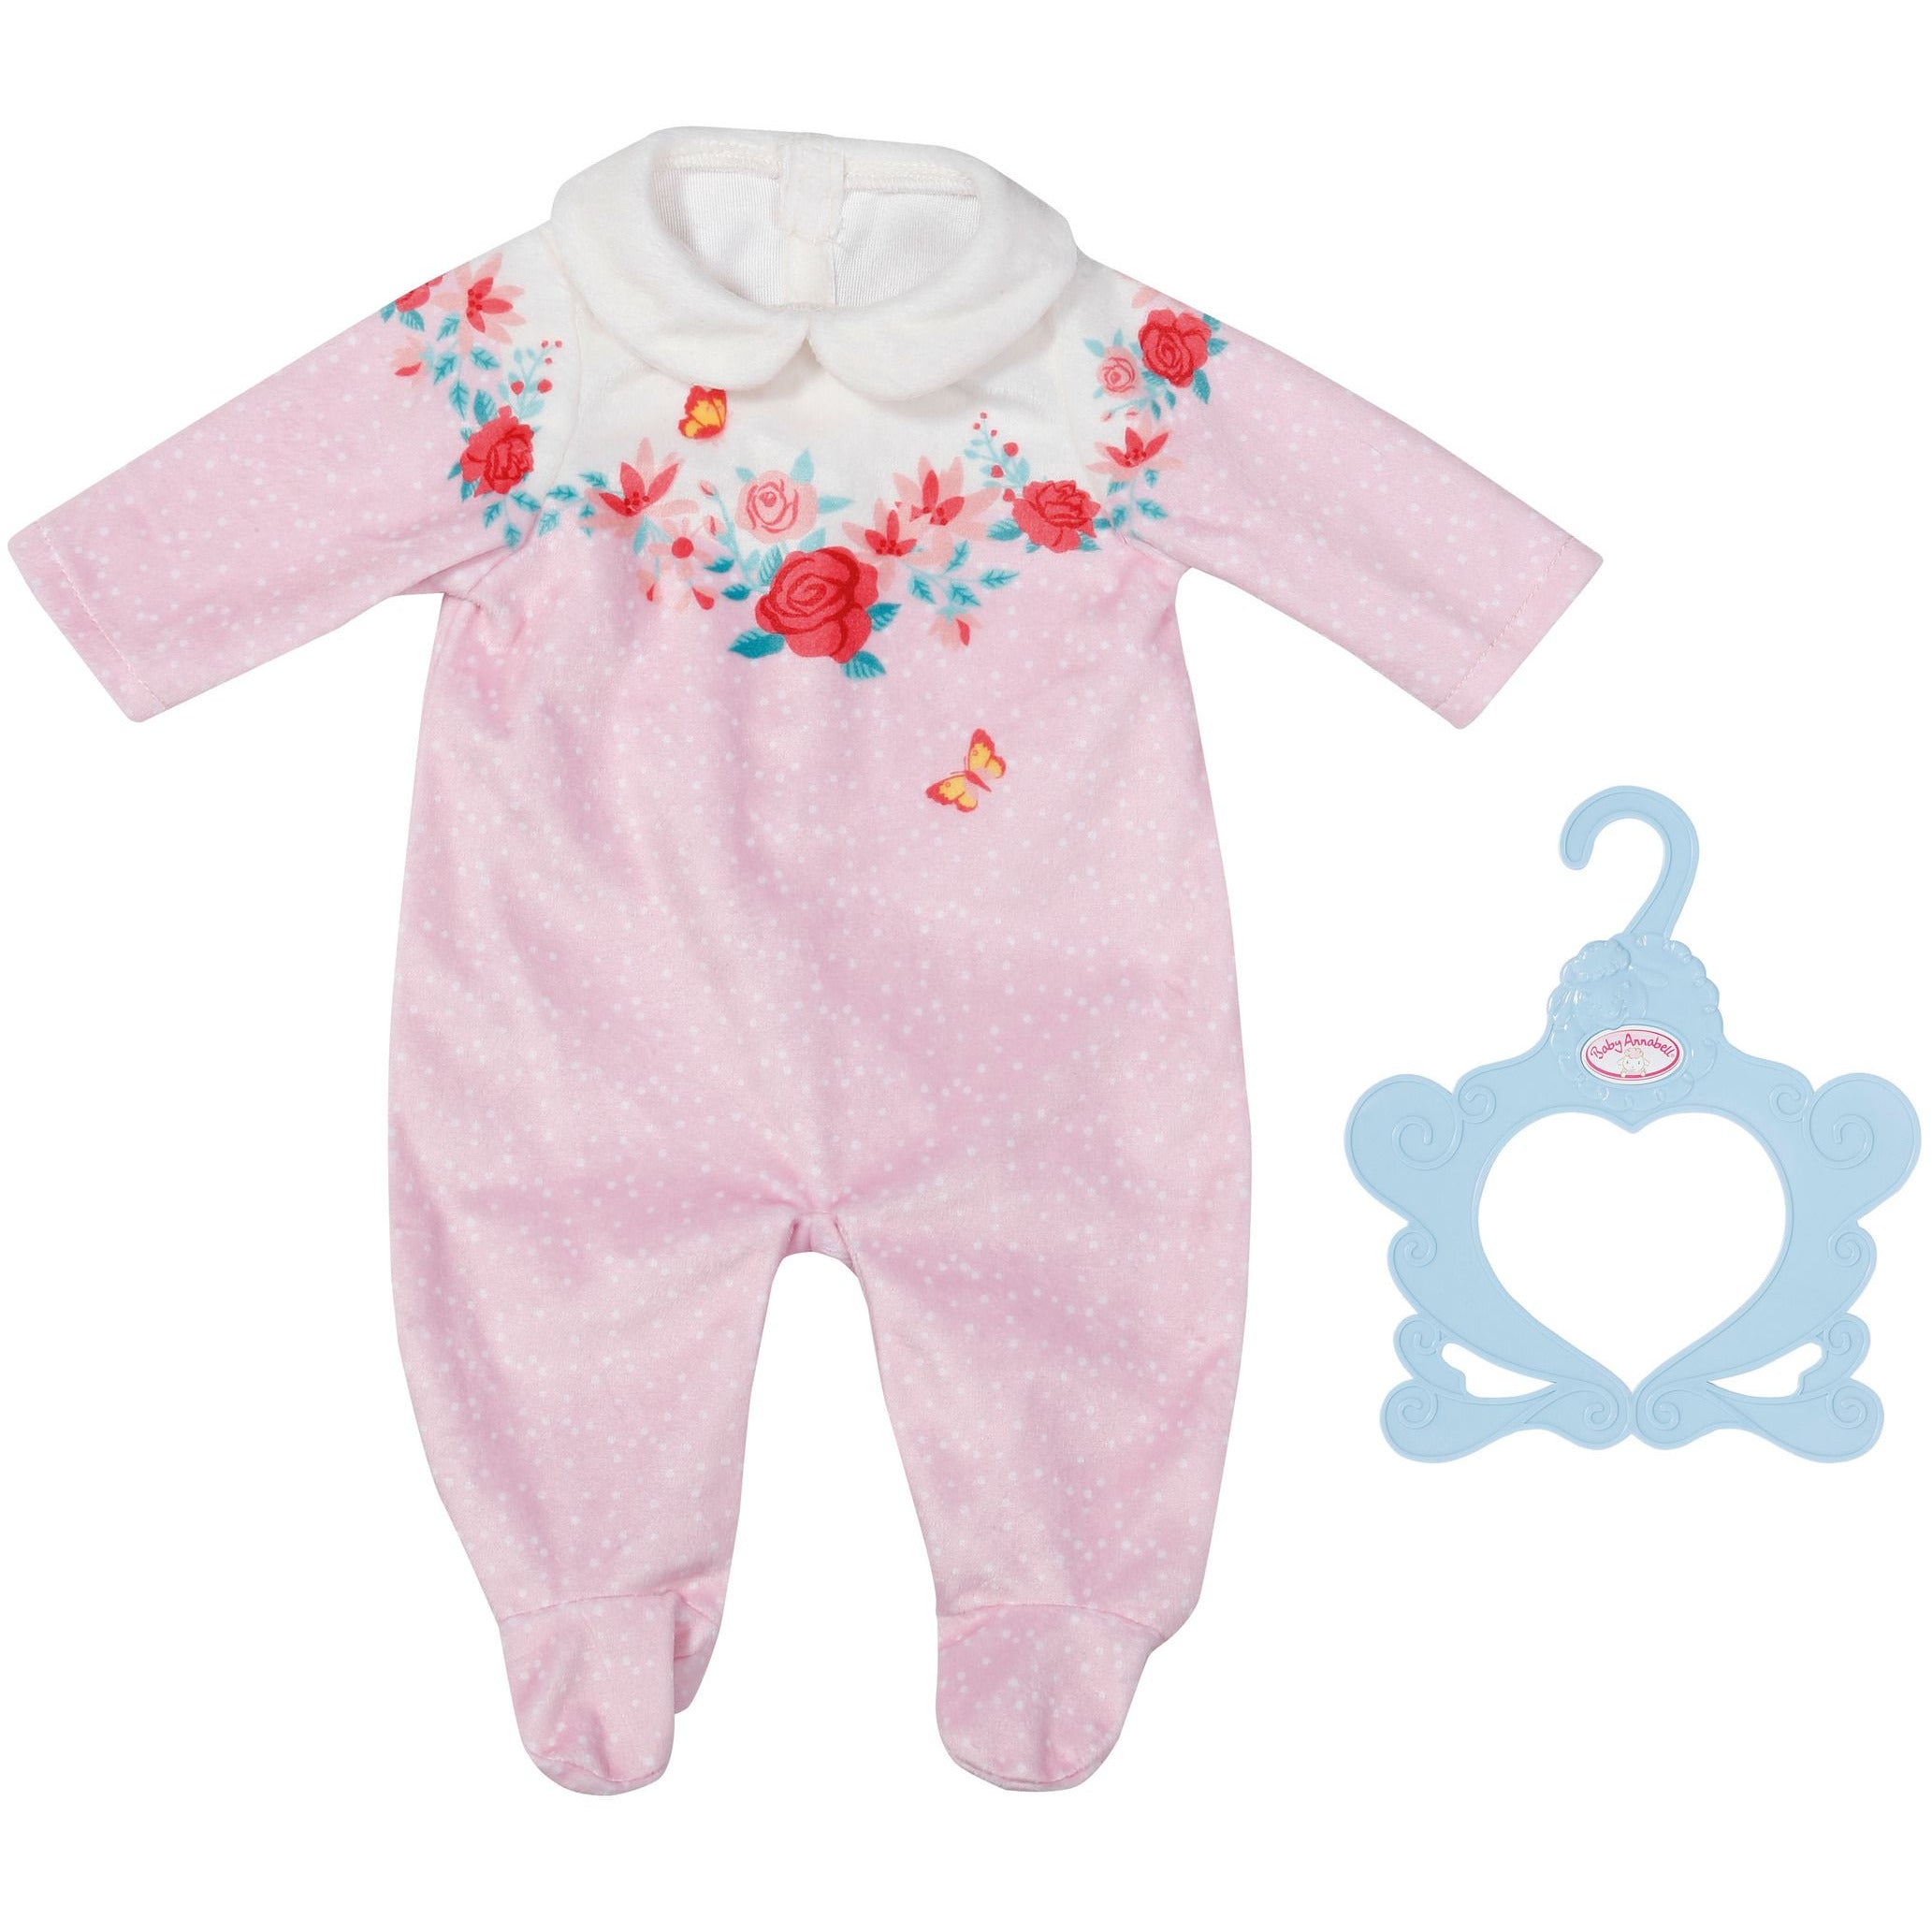 Baby Annabell Romper Pink 43cm Baby Annabell